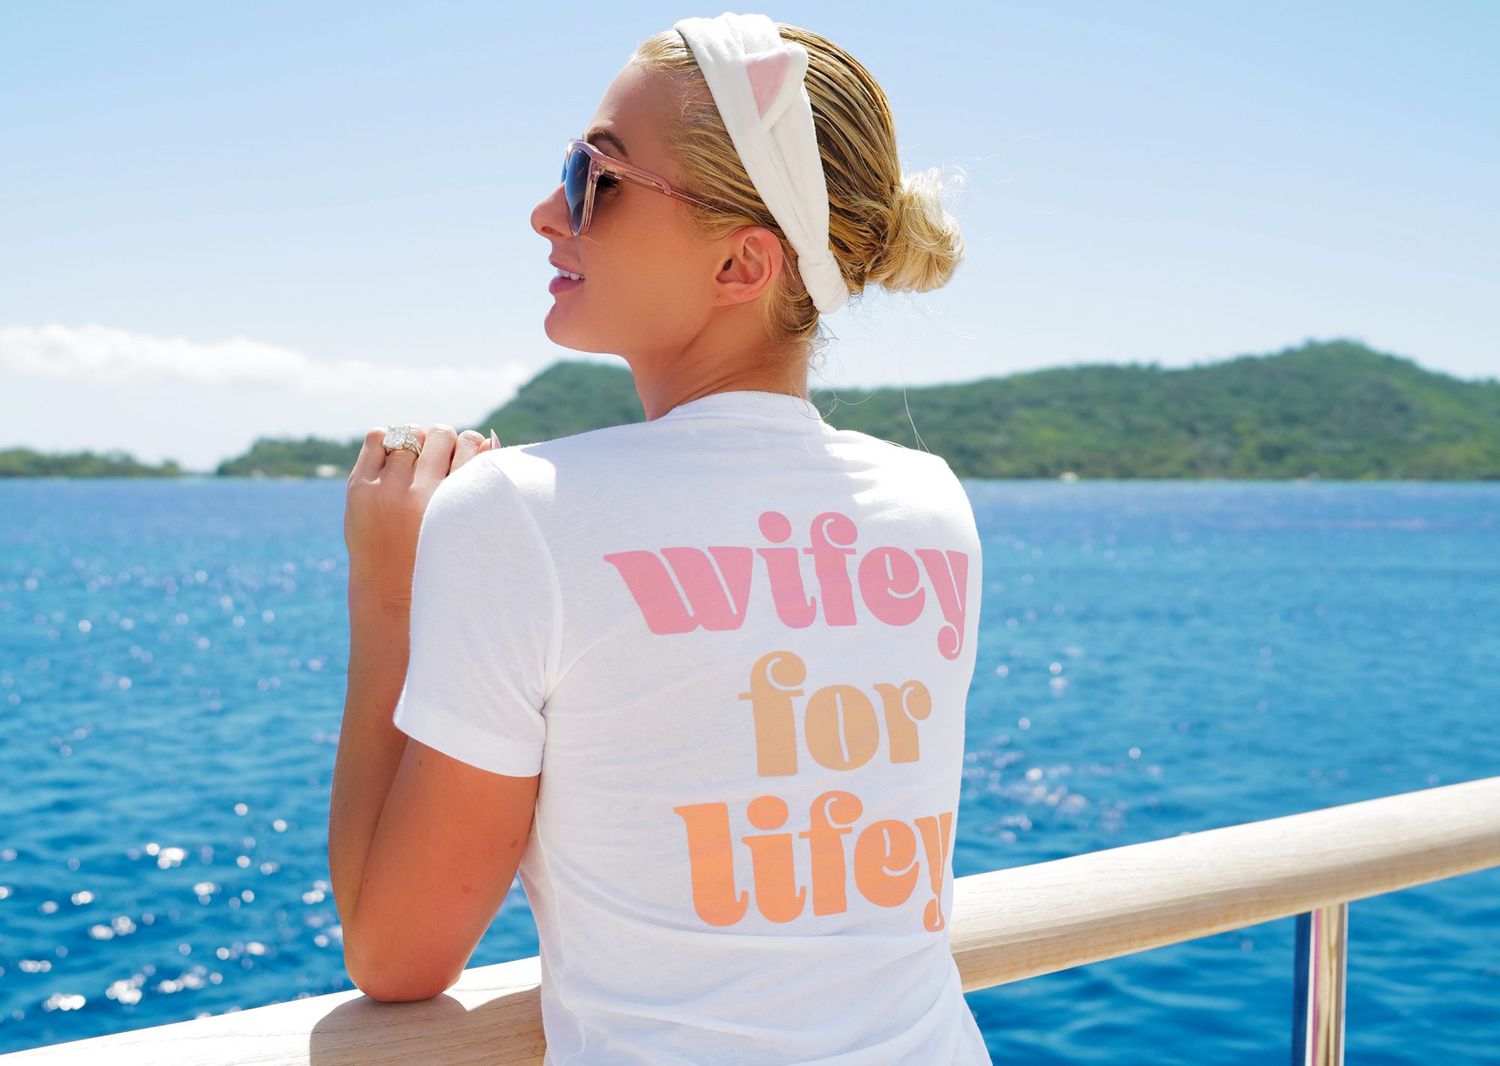 Paris Hilton Wears &#39;Wifey for Life&#39; T-Shirt 1 Week After Wedding | PEOPLE.com